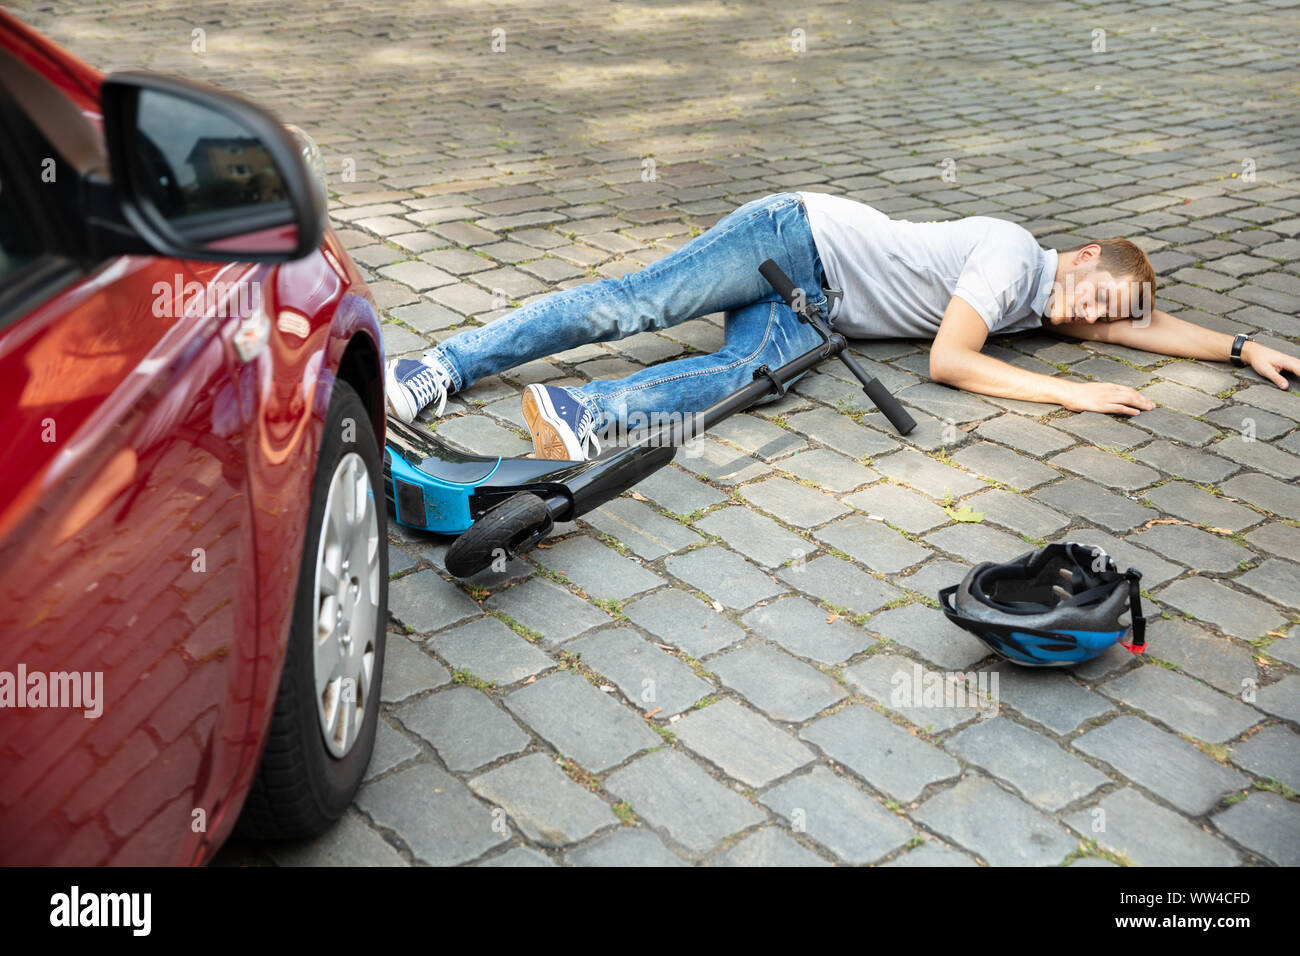 Man After Accident On Electric Scooter Overrun By Car Stock Photo - Alamy